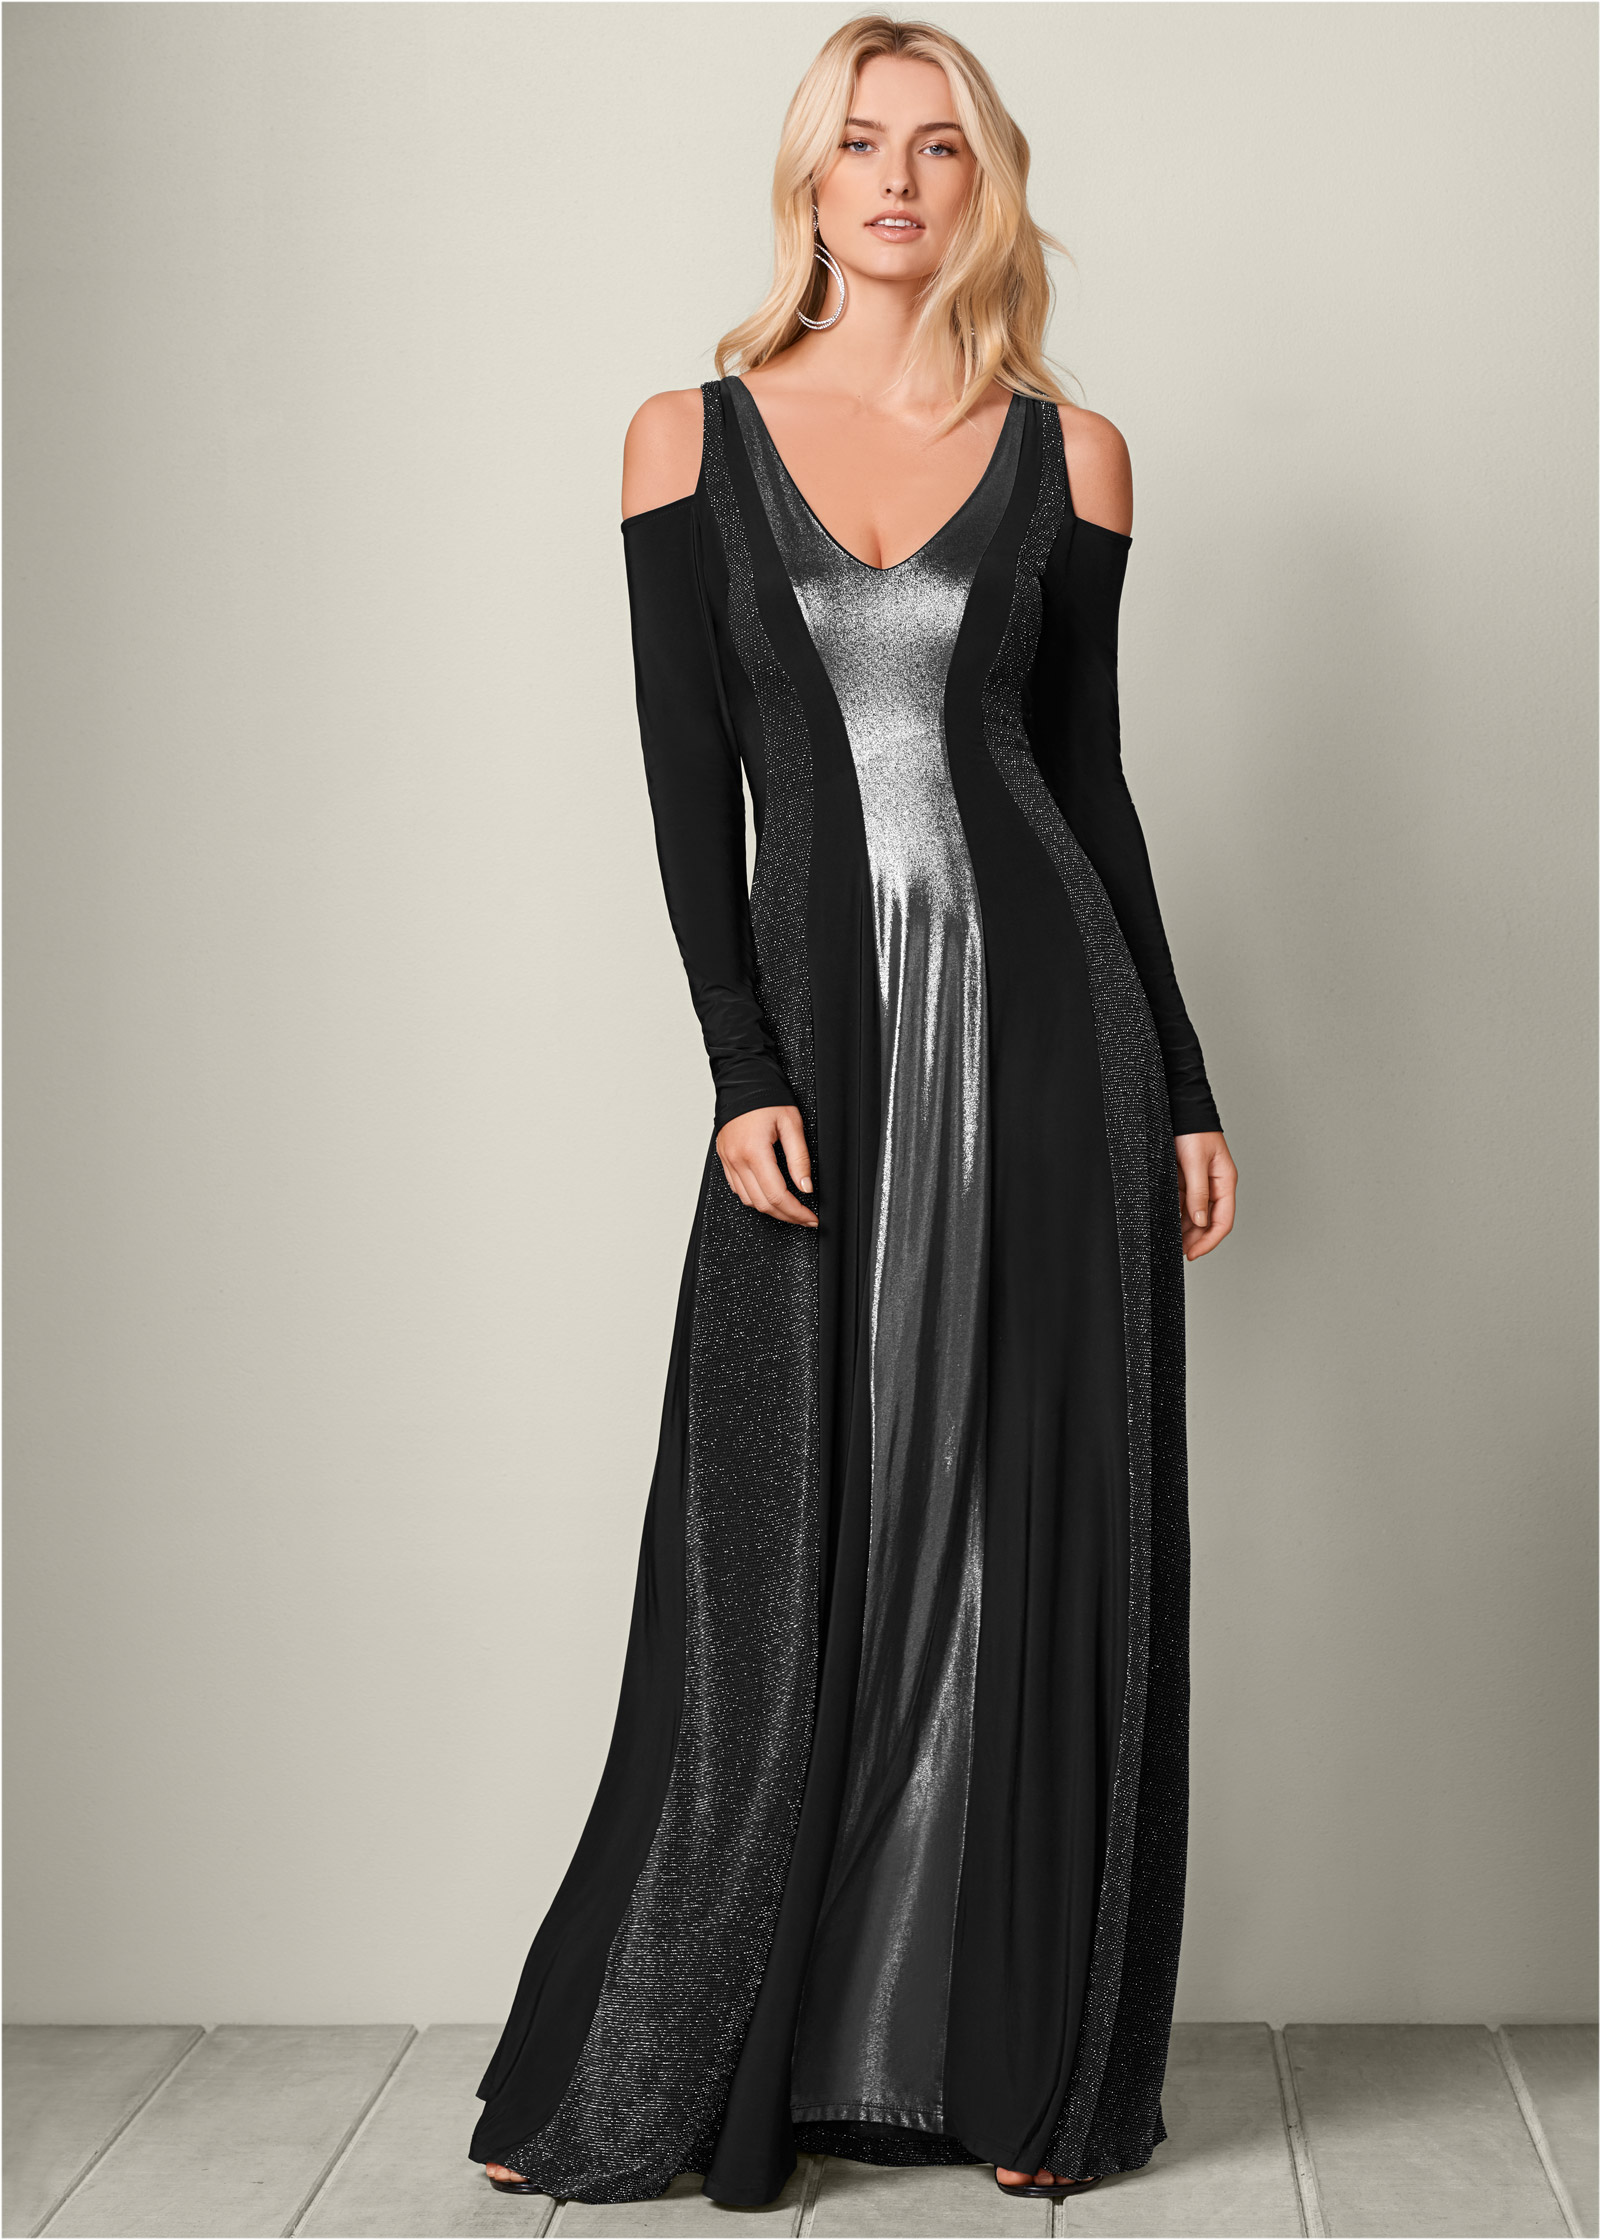 silver and black long dress